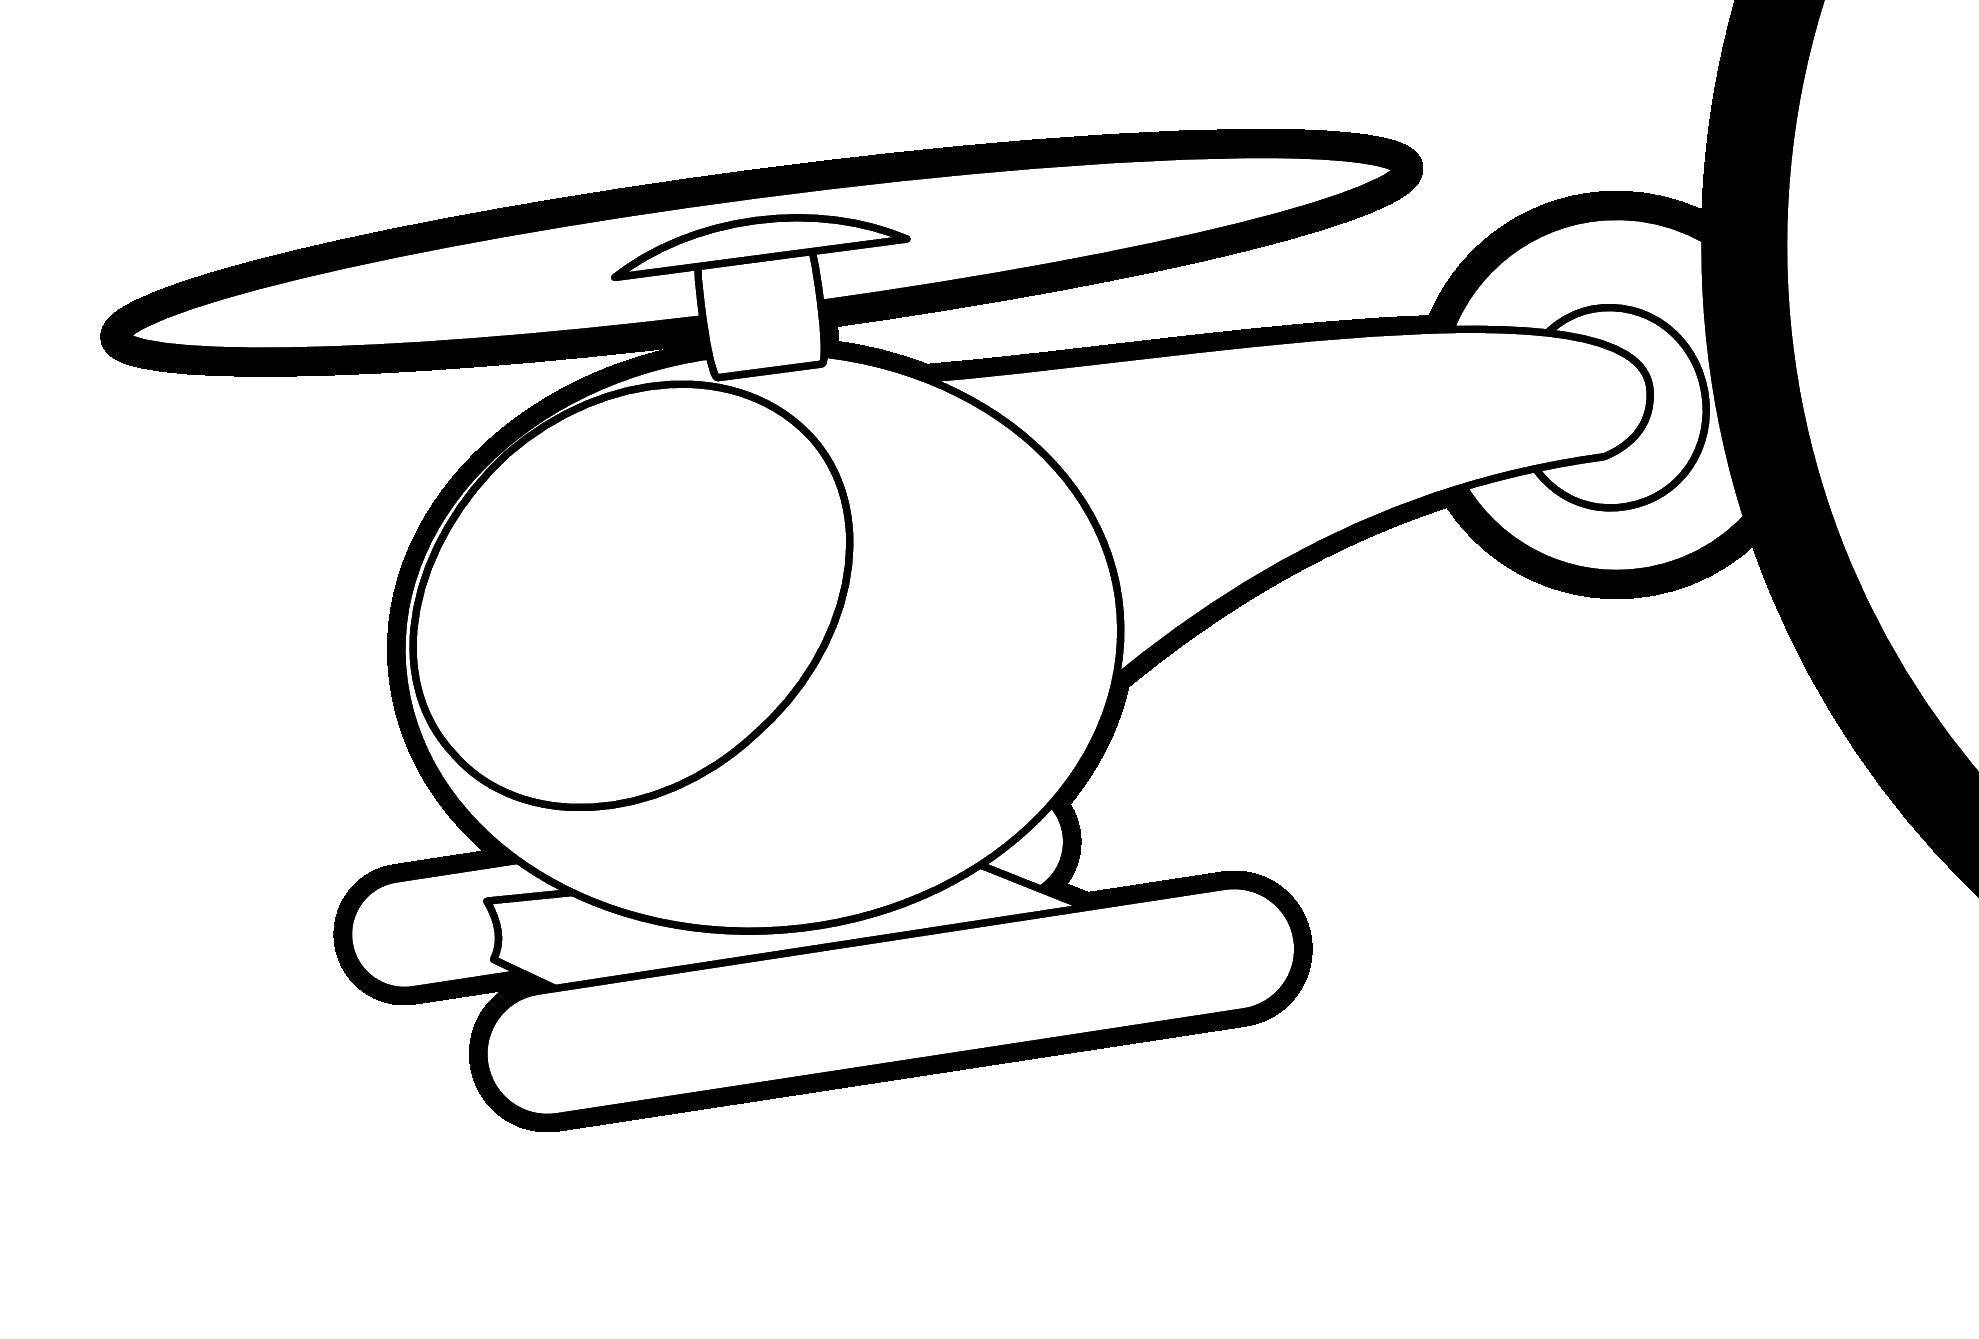 Coloring Helicopter. Category Helicopters. Tags:  helicopter, air transportation, sky.